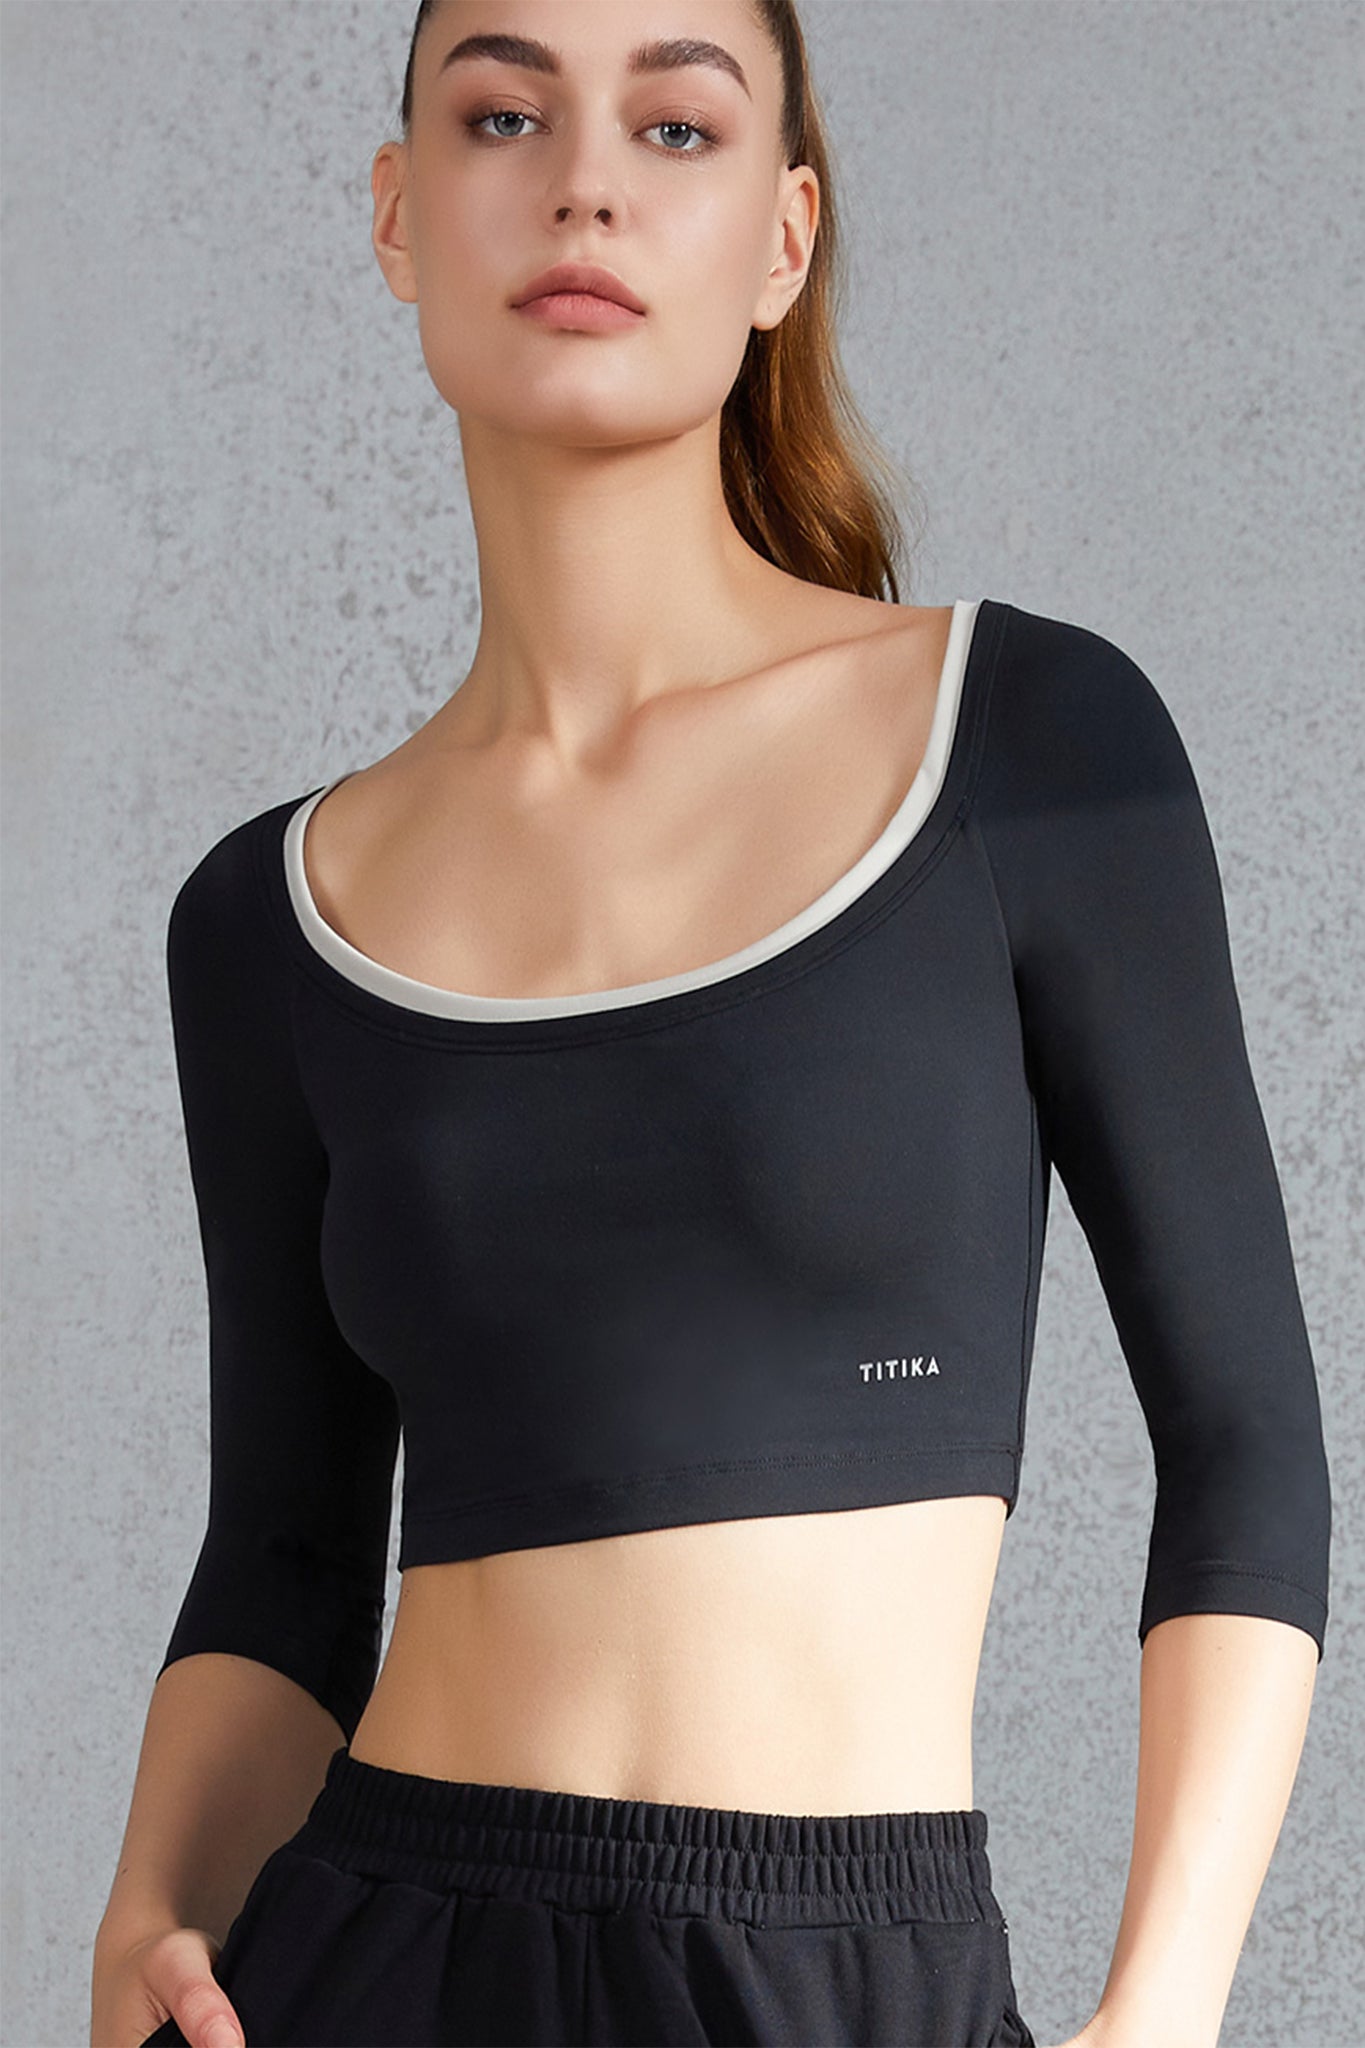 Piano Round Cropped Top